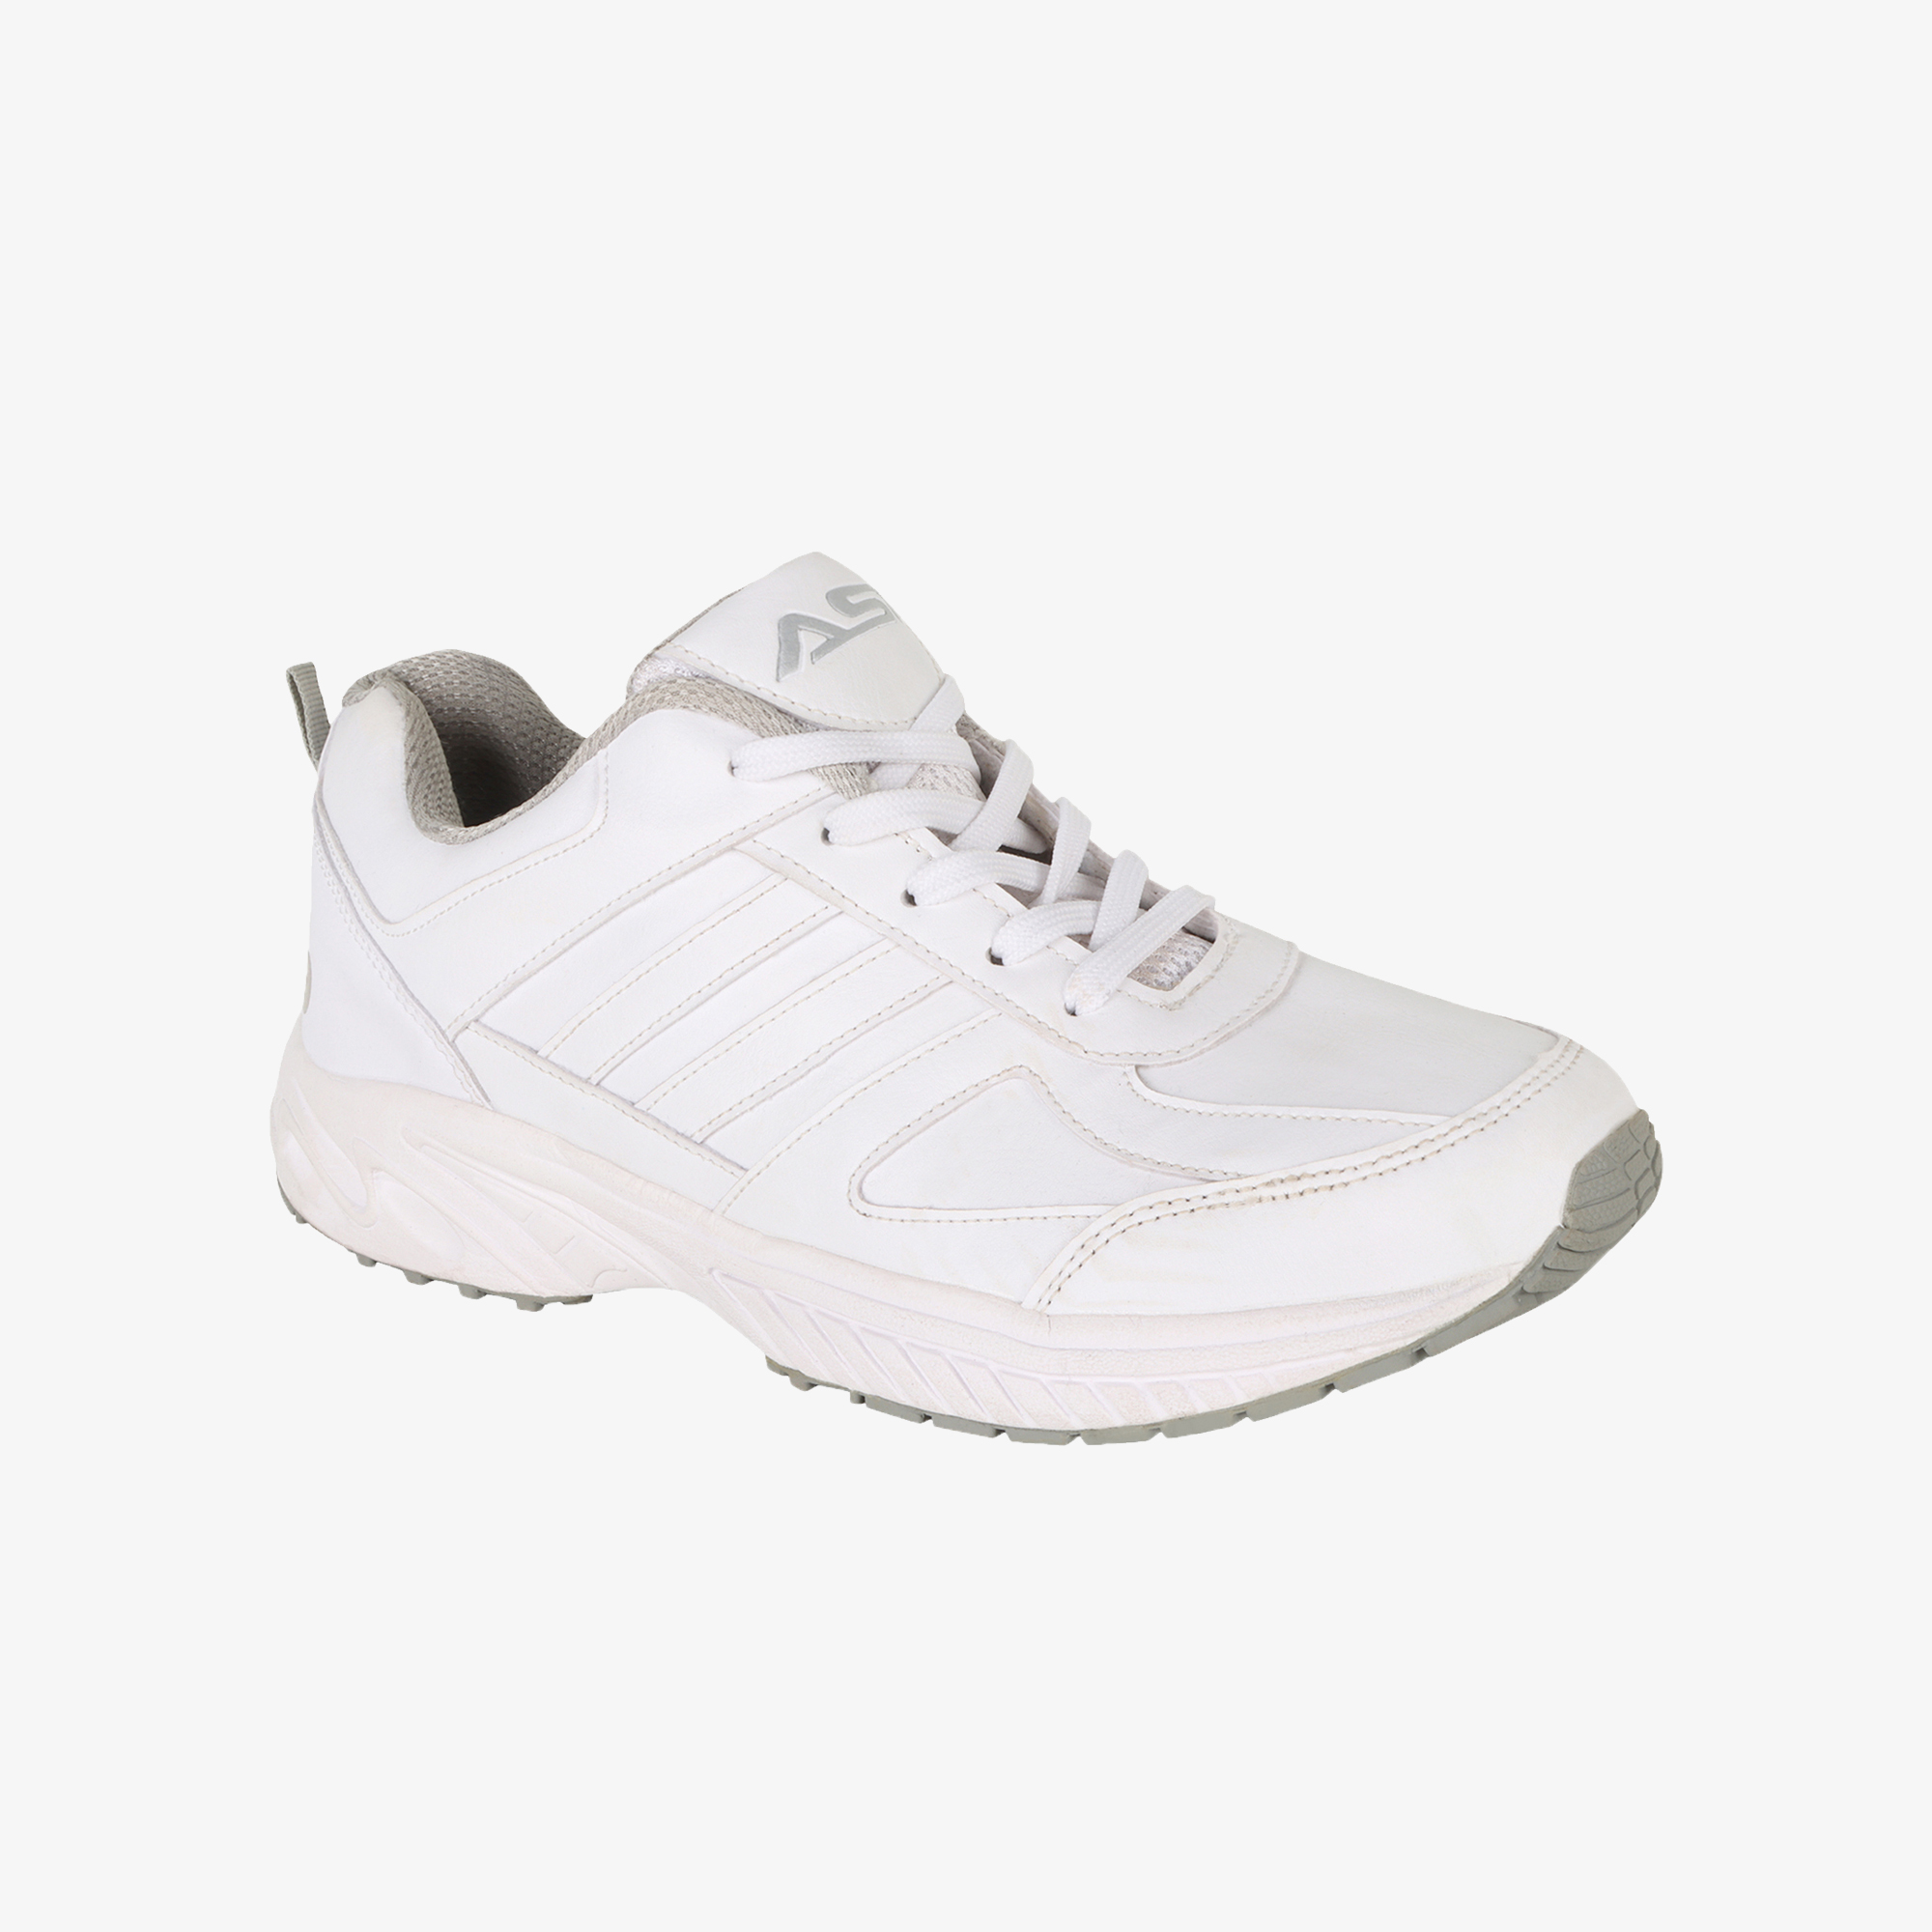 Buy RUDRA White Colour Sports Shoes for Dashing Boys and Mens. at Amazon.in